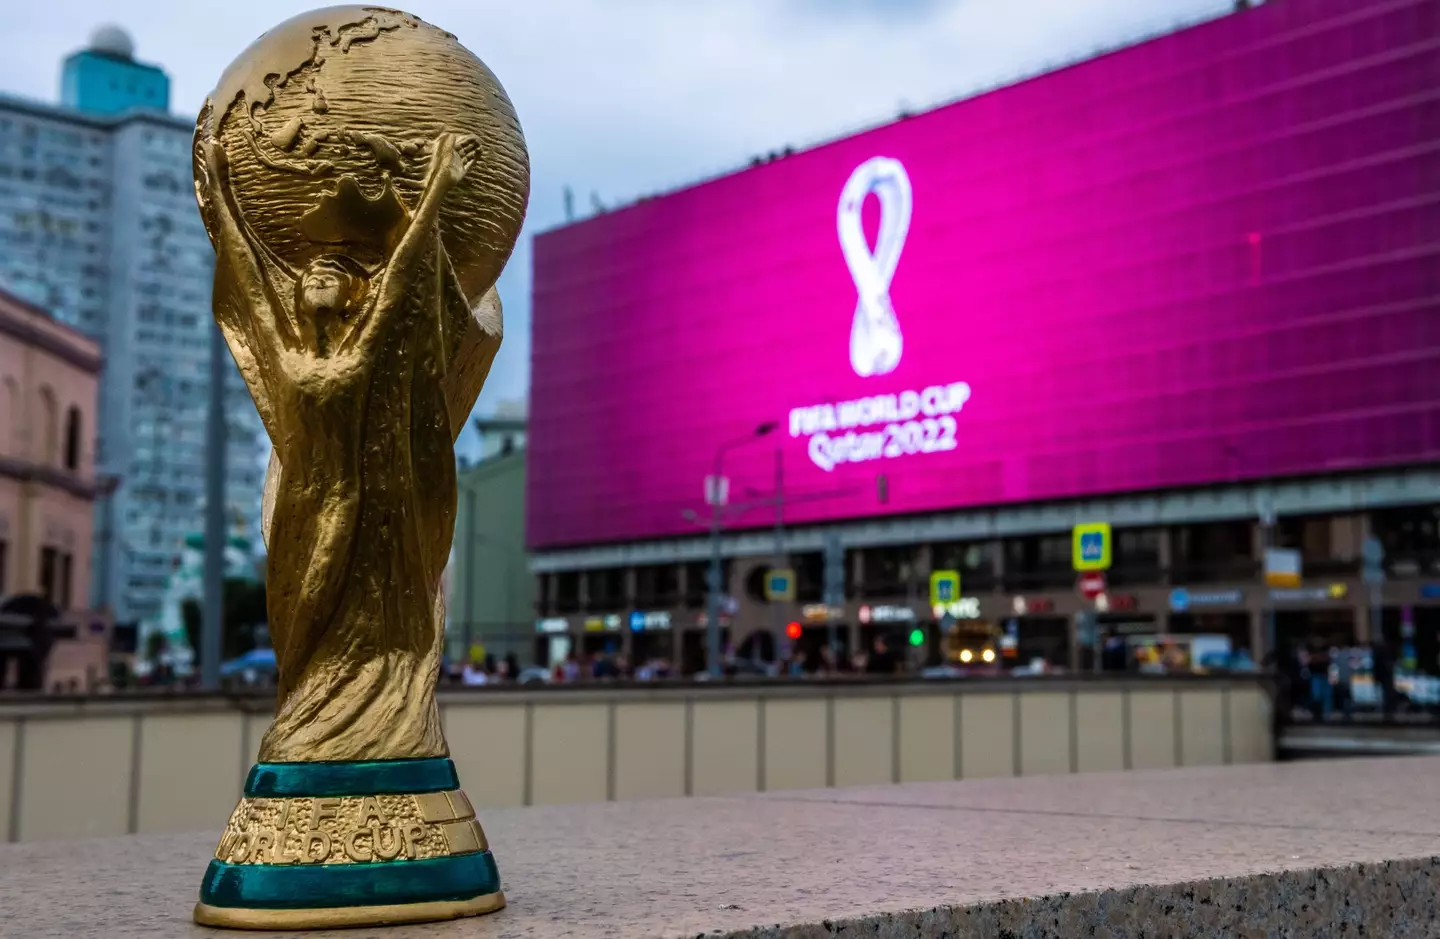 The tournament is now expected to begin on November 20 (Image: Alamy)